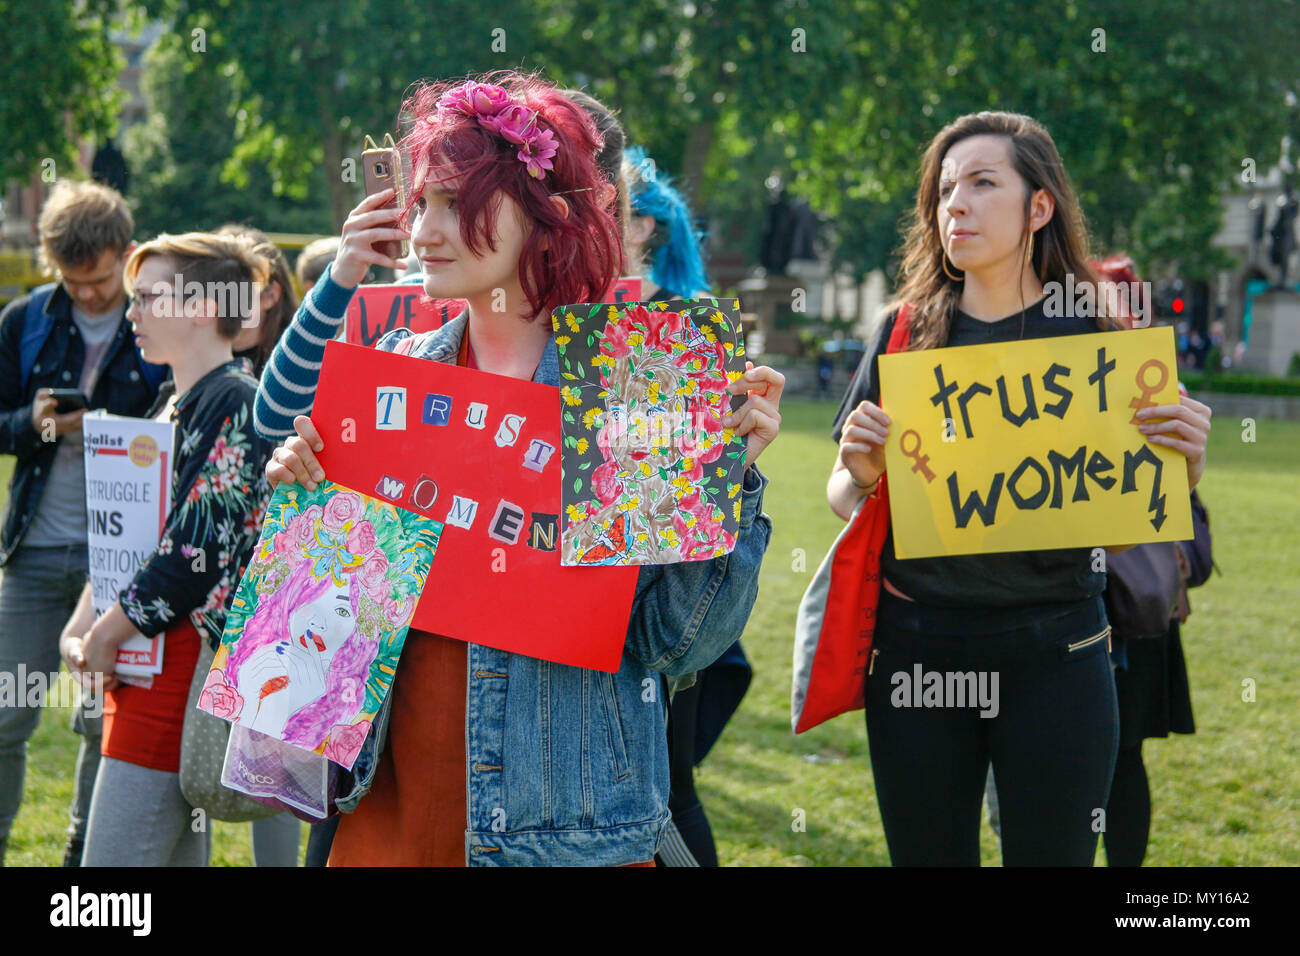 London, UK. 5th June, 2018. Abortion in Northern Ireland Protesters Credit: Alex Cavendish/Alamy Live News Stock Photo